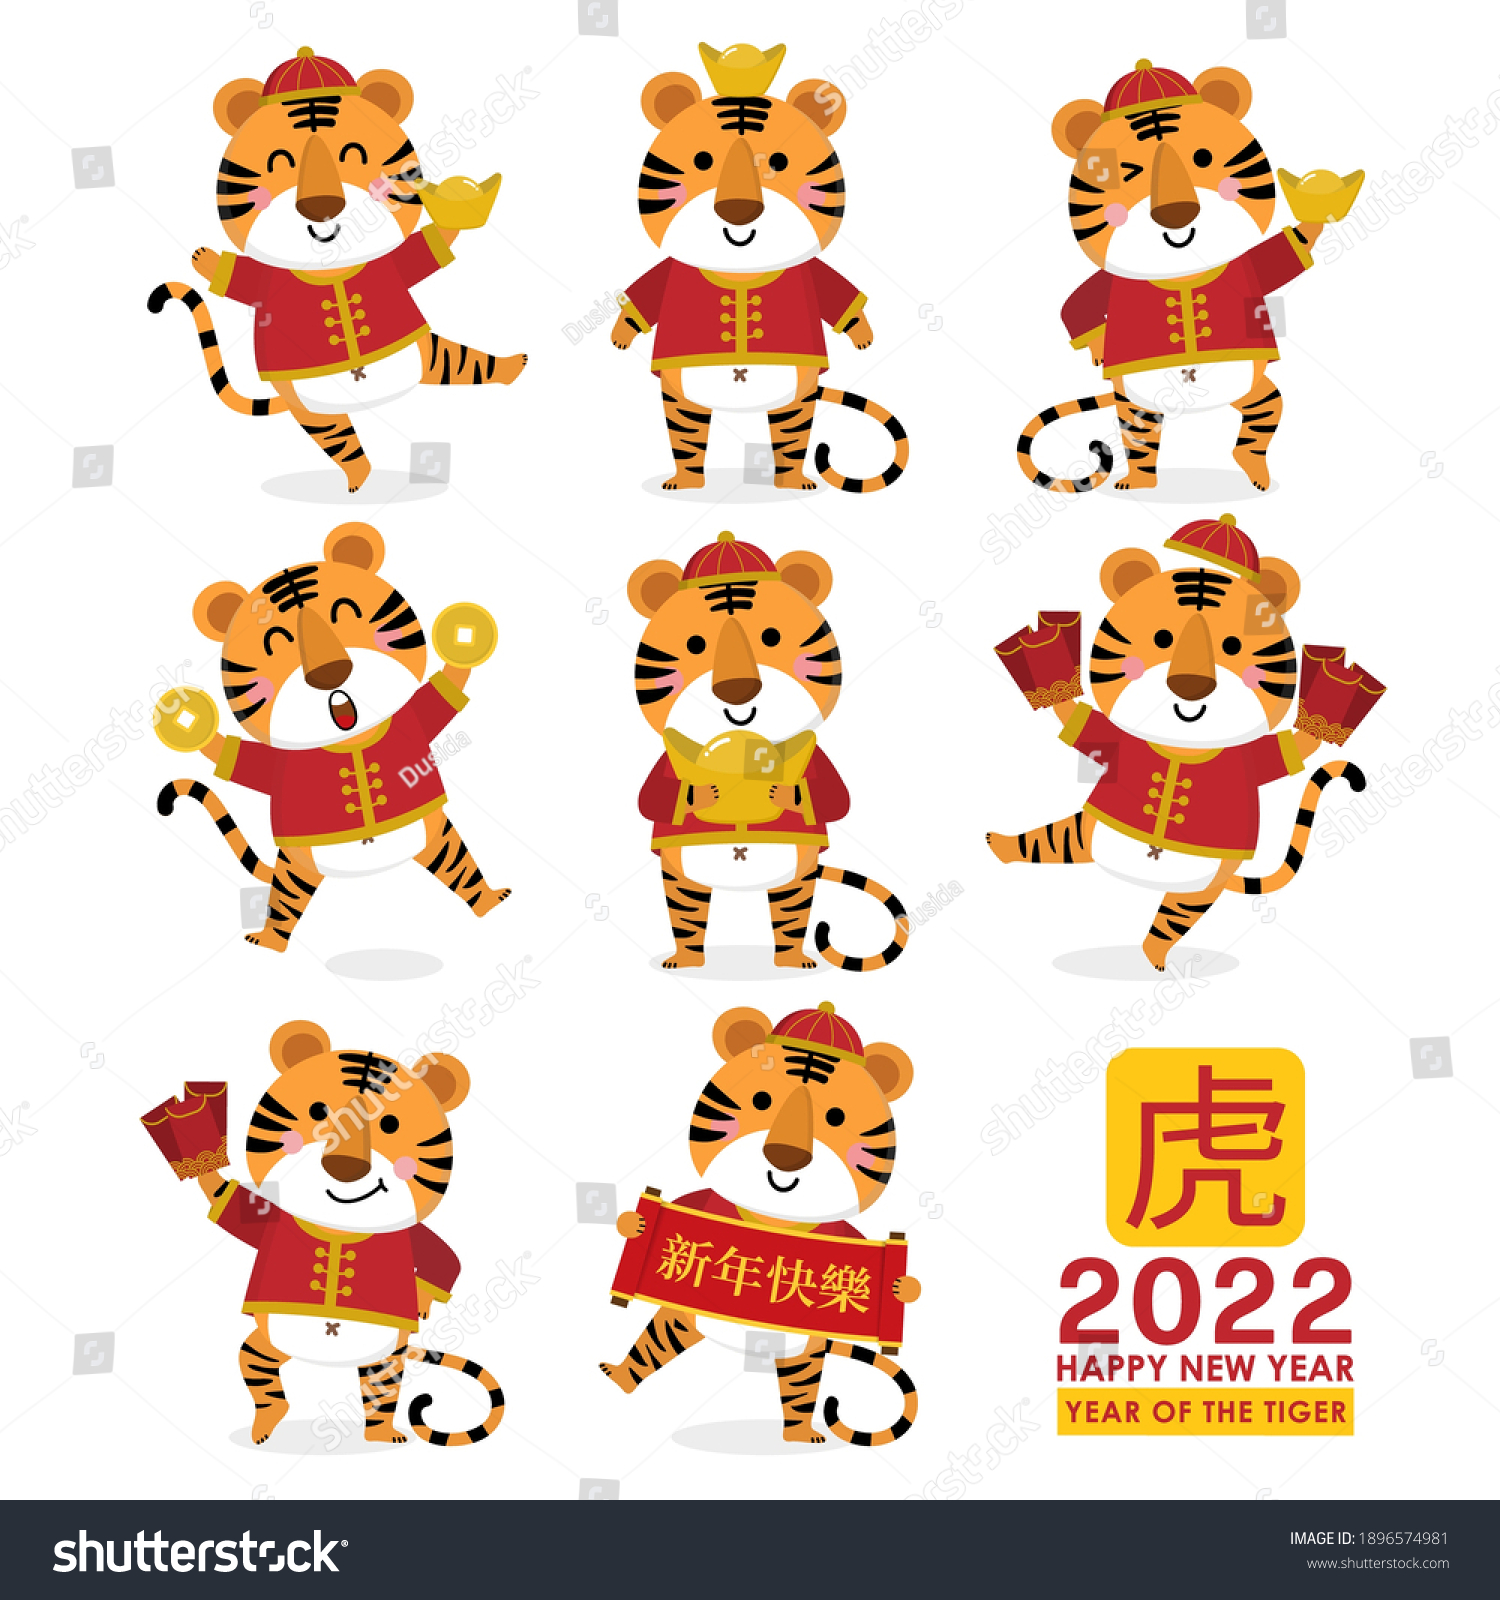 2022 year wishes chinese tiger new 2022 Year